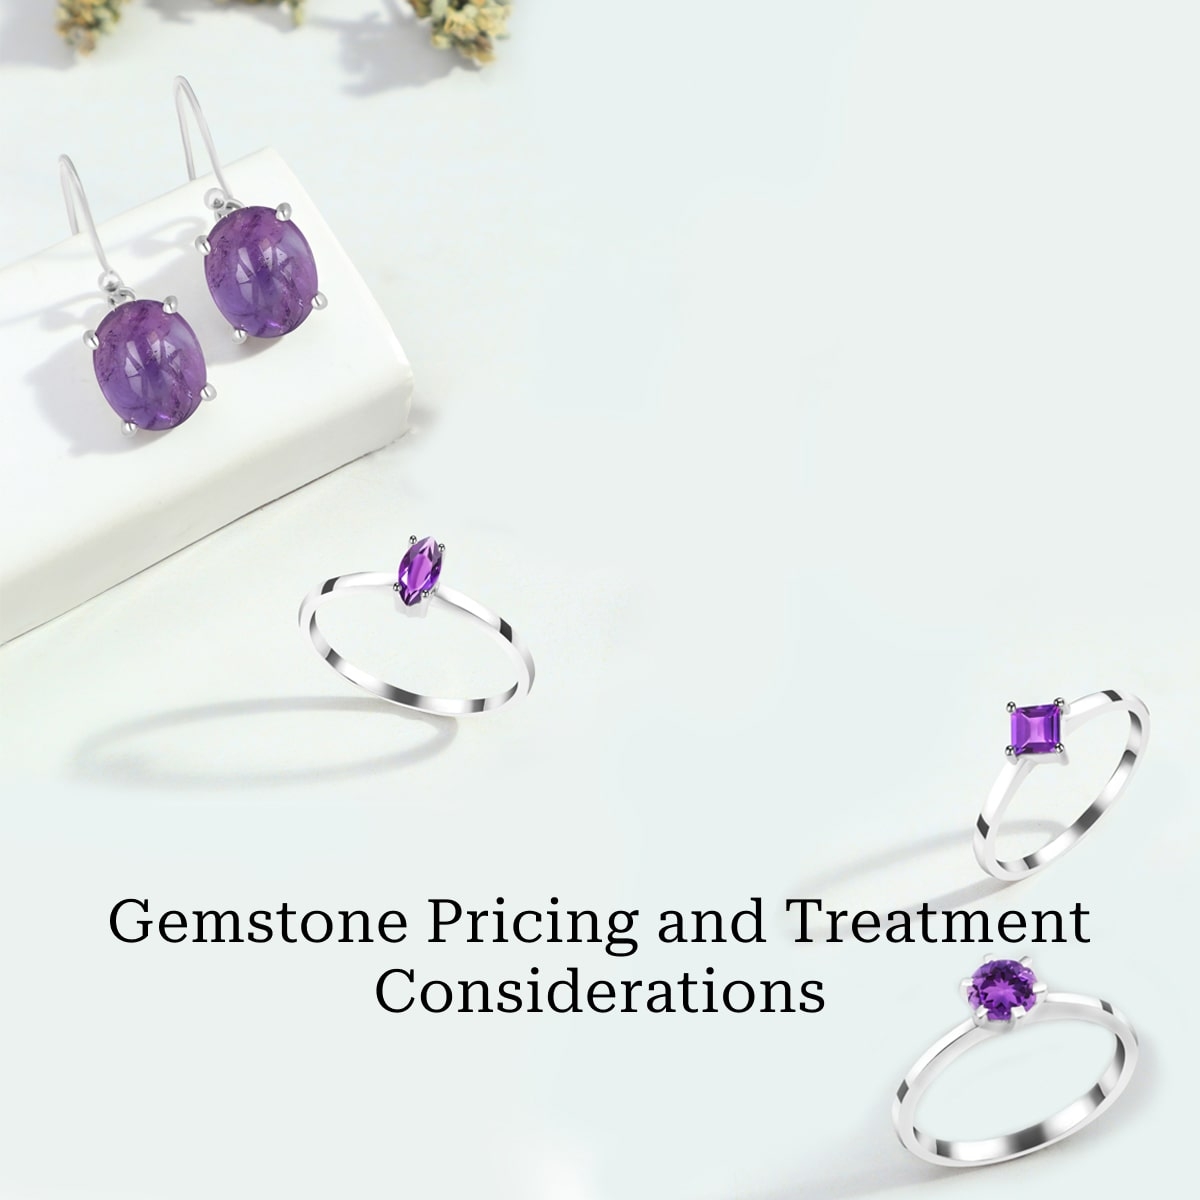 Treatment or Lack of Treatment and its effect on Gemstone Pricing